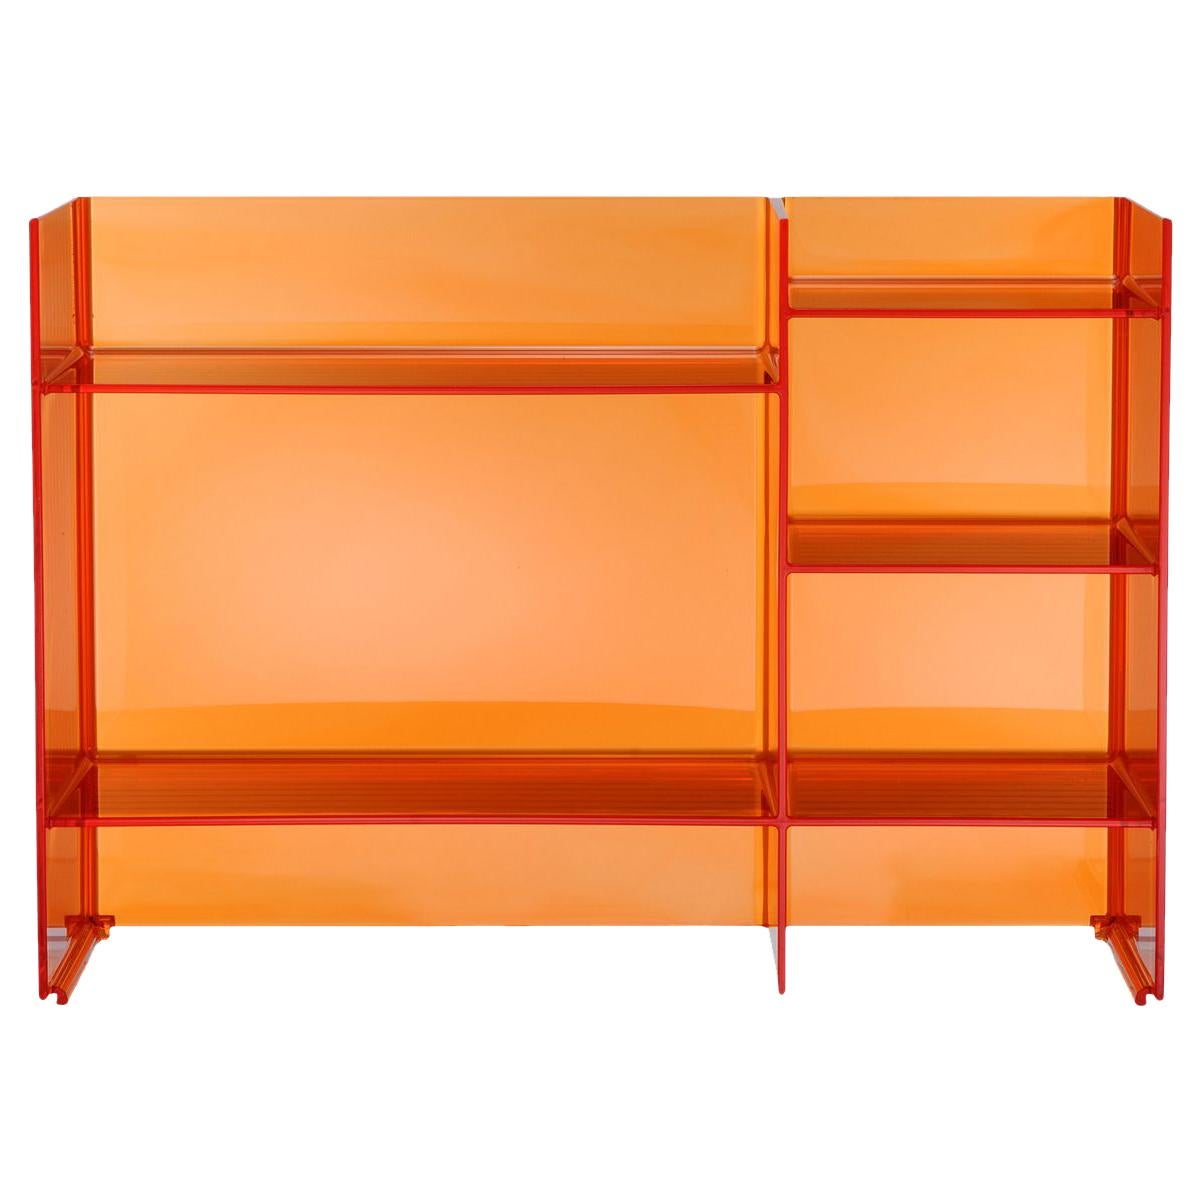 Kartell Sound Rack Modular Bookcase in Tangerine by Ludovica and Roberto Palomba For Sale